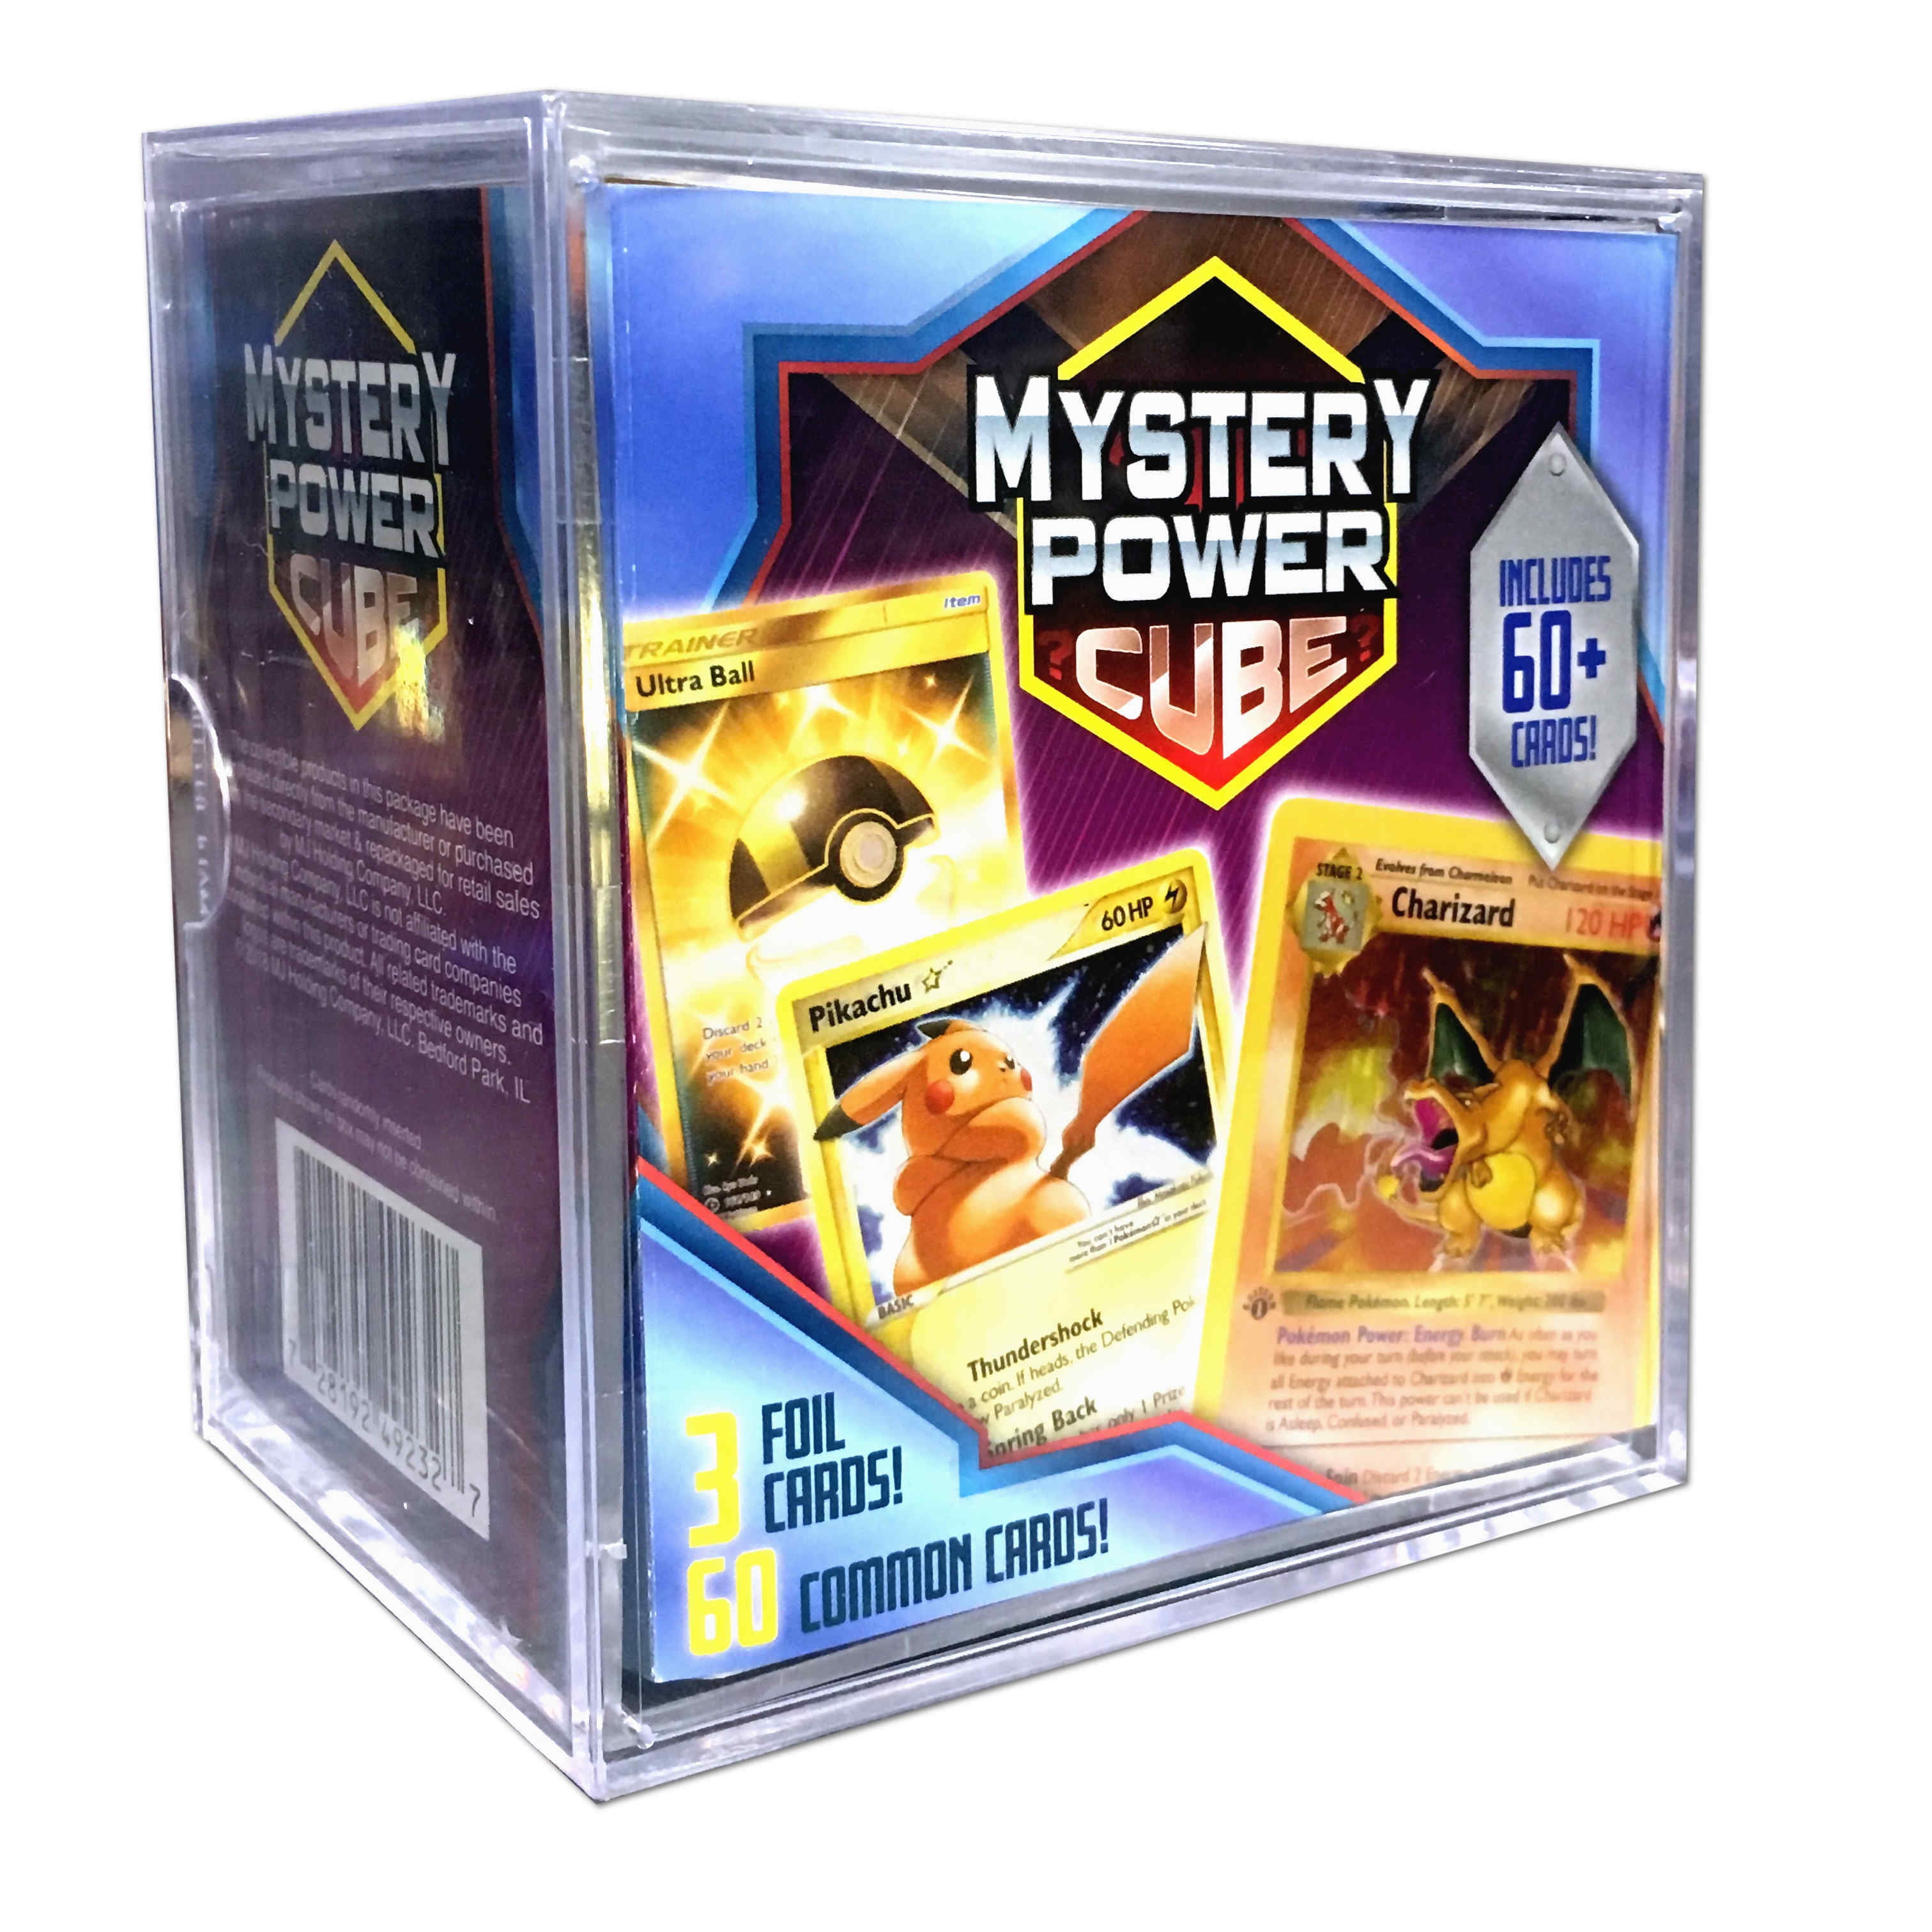 POKEMON MYSTERY POWER CUBE SEALED 60 WALMART EXCL CARDS 3 FOIL HOLOS CHARIZARD 